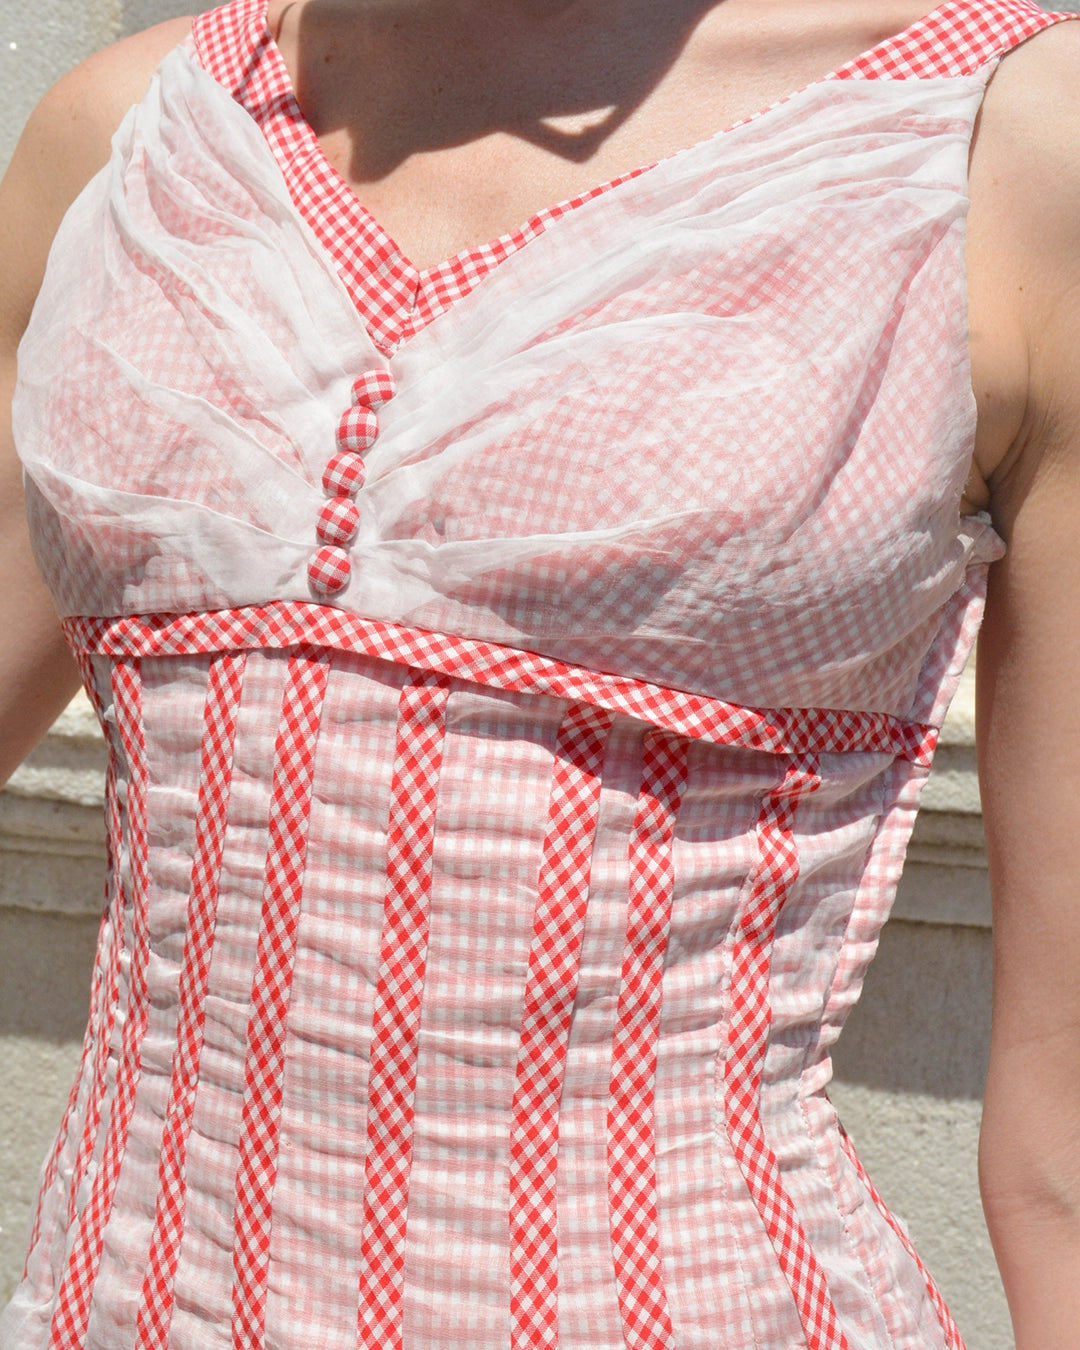 Vintage 1950s Gingham Fit and Flare Dress with Organdy Overlay